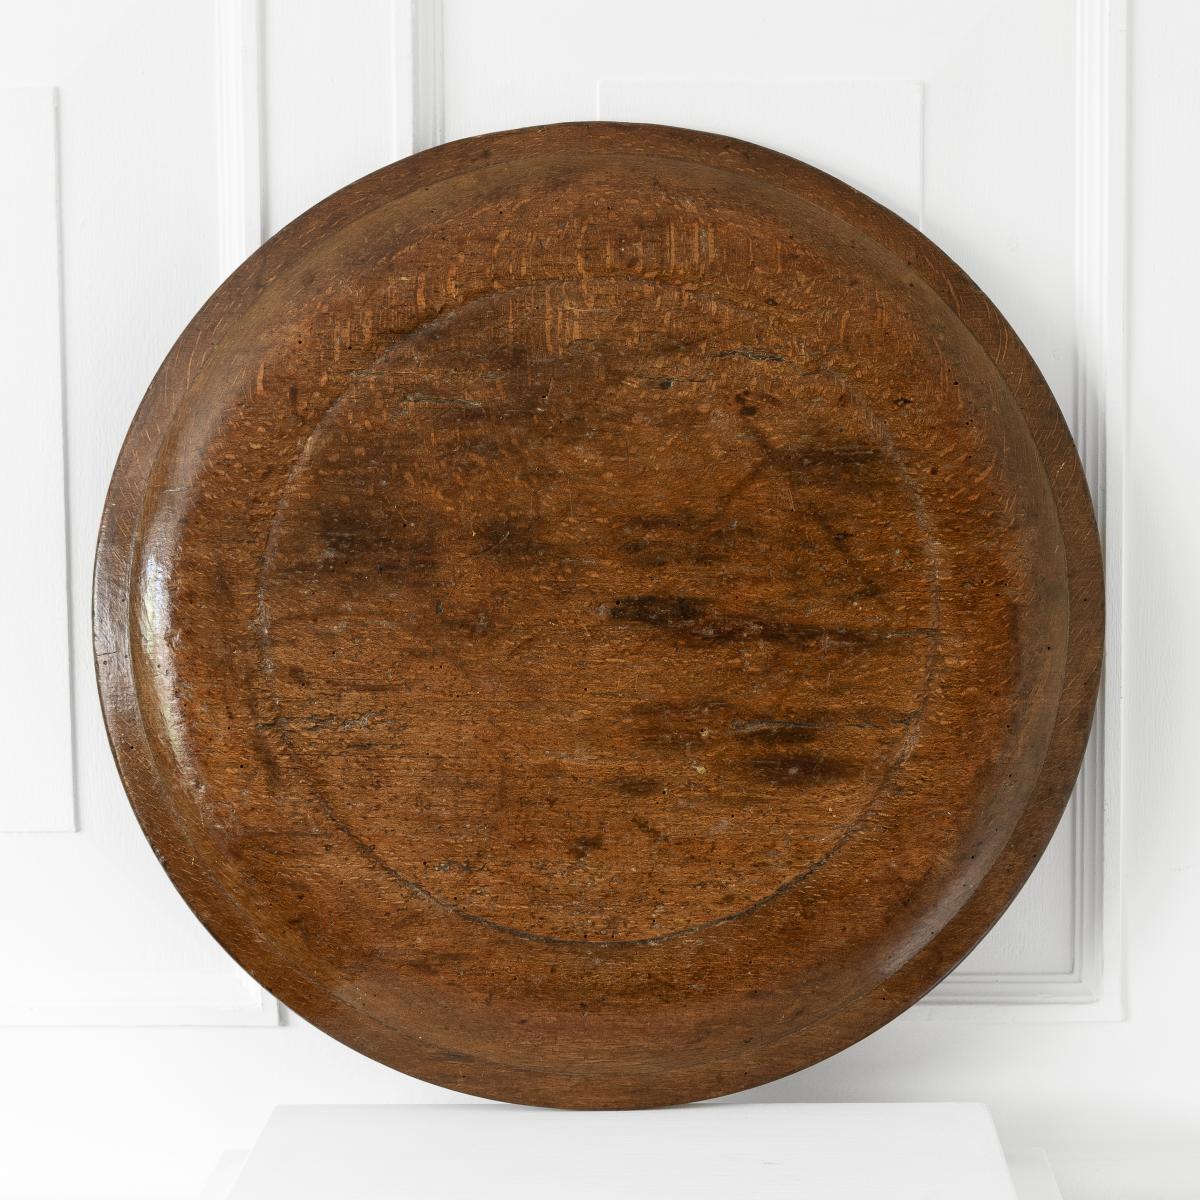 A good beech platter of exceptional large size, English, circa 1750-1800